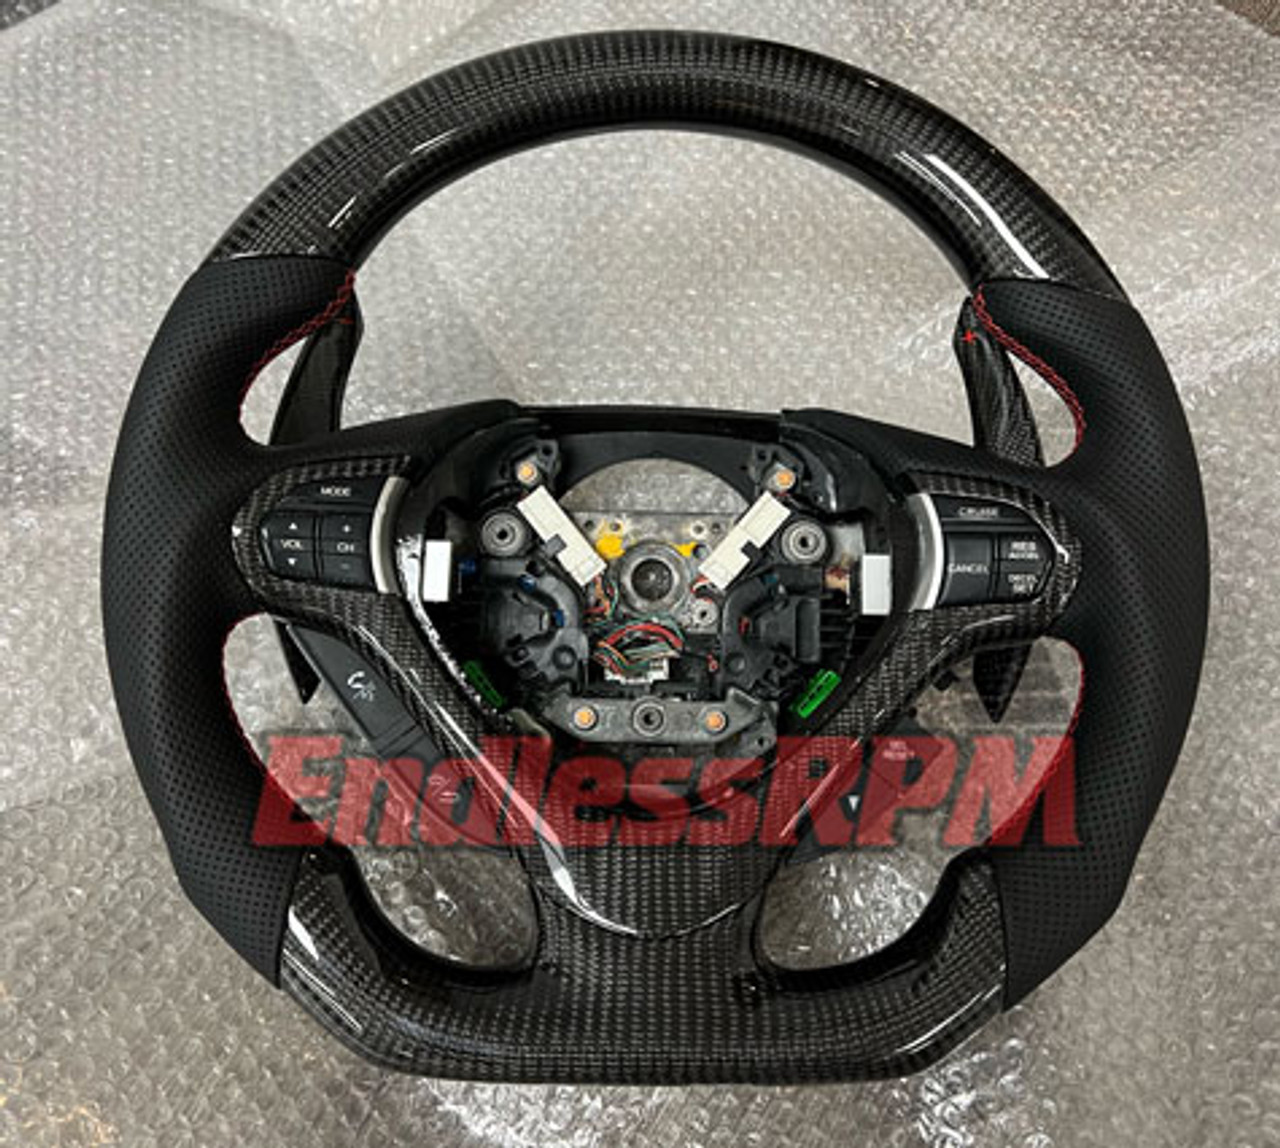 ACURA TSX 2009-2014 - Carbon Fiber Steering Wheel w/ faceplate ( as pictured)